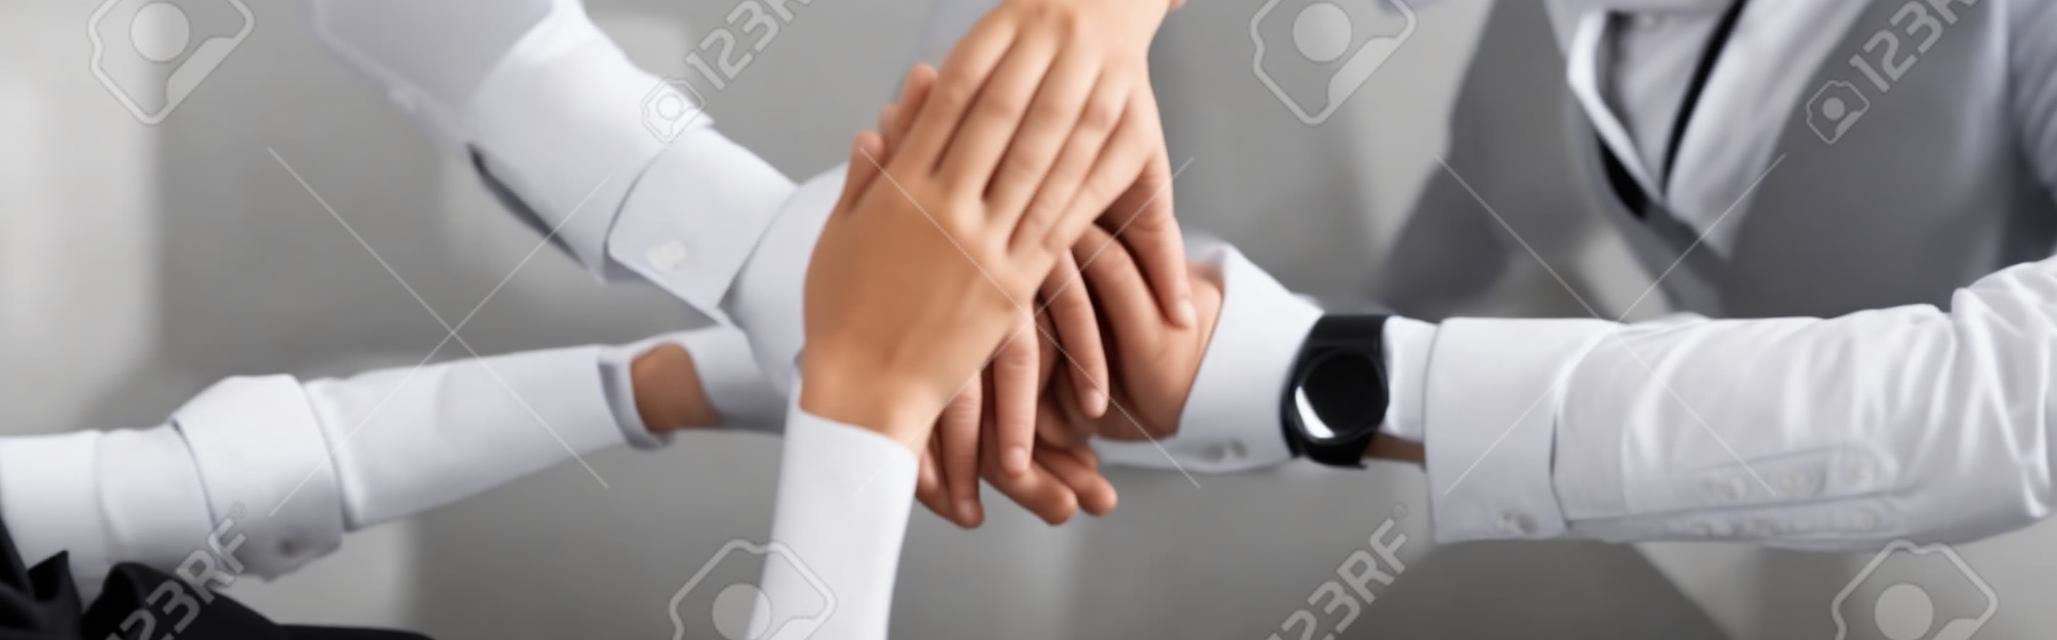 panoramic shot of businesswoman and businessmen putting hands together